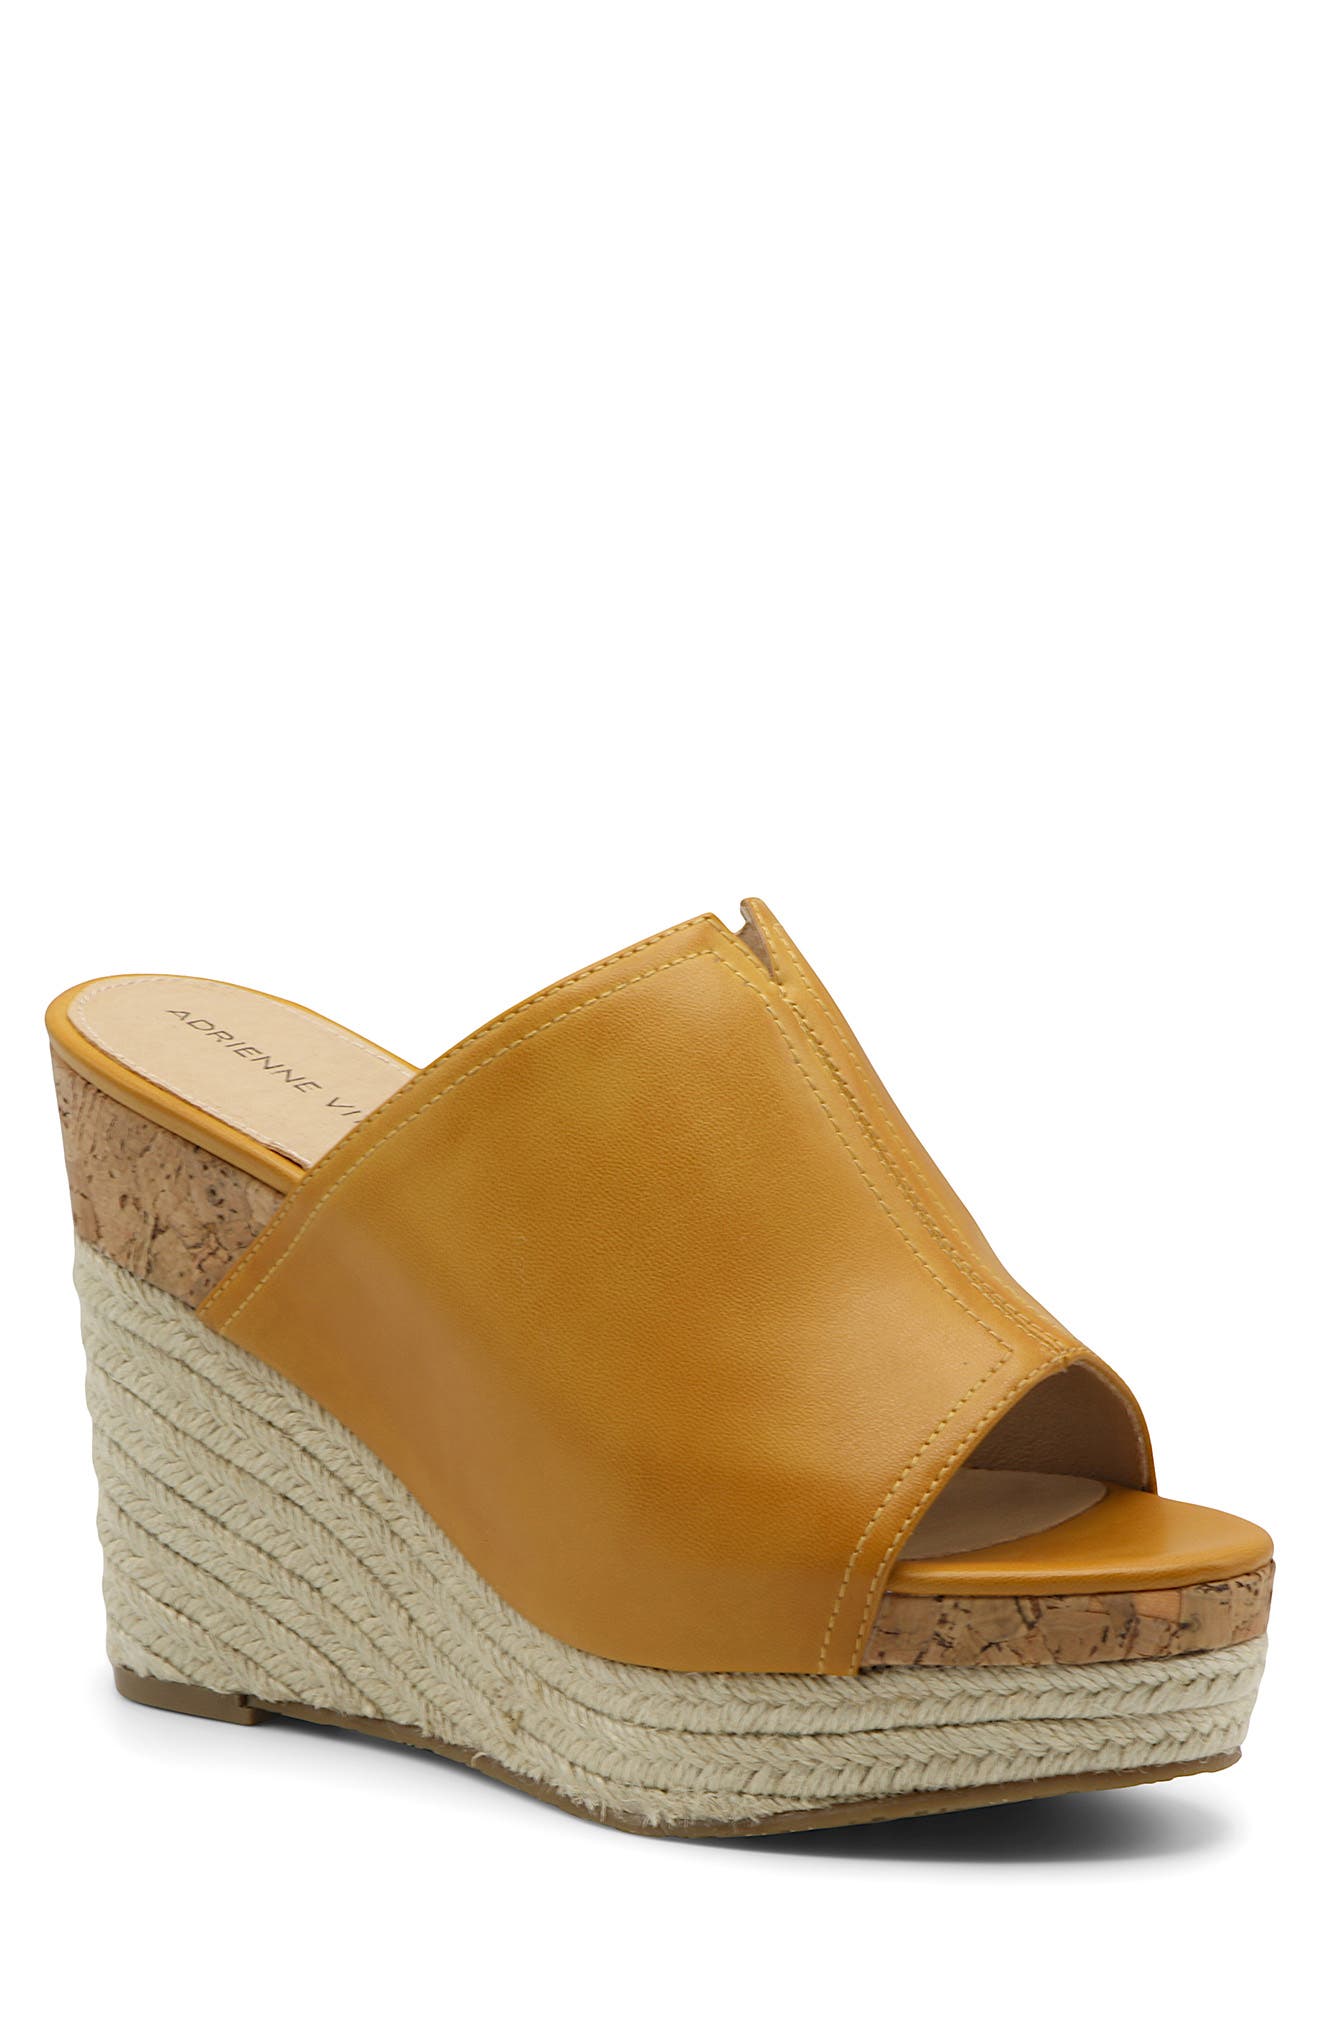 yellow wedges size 5